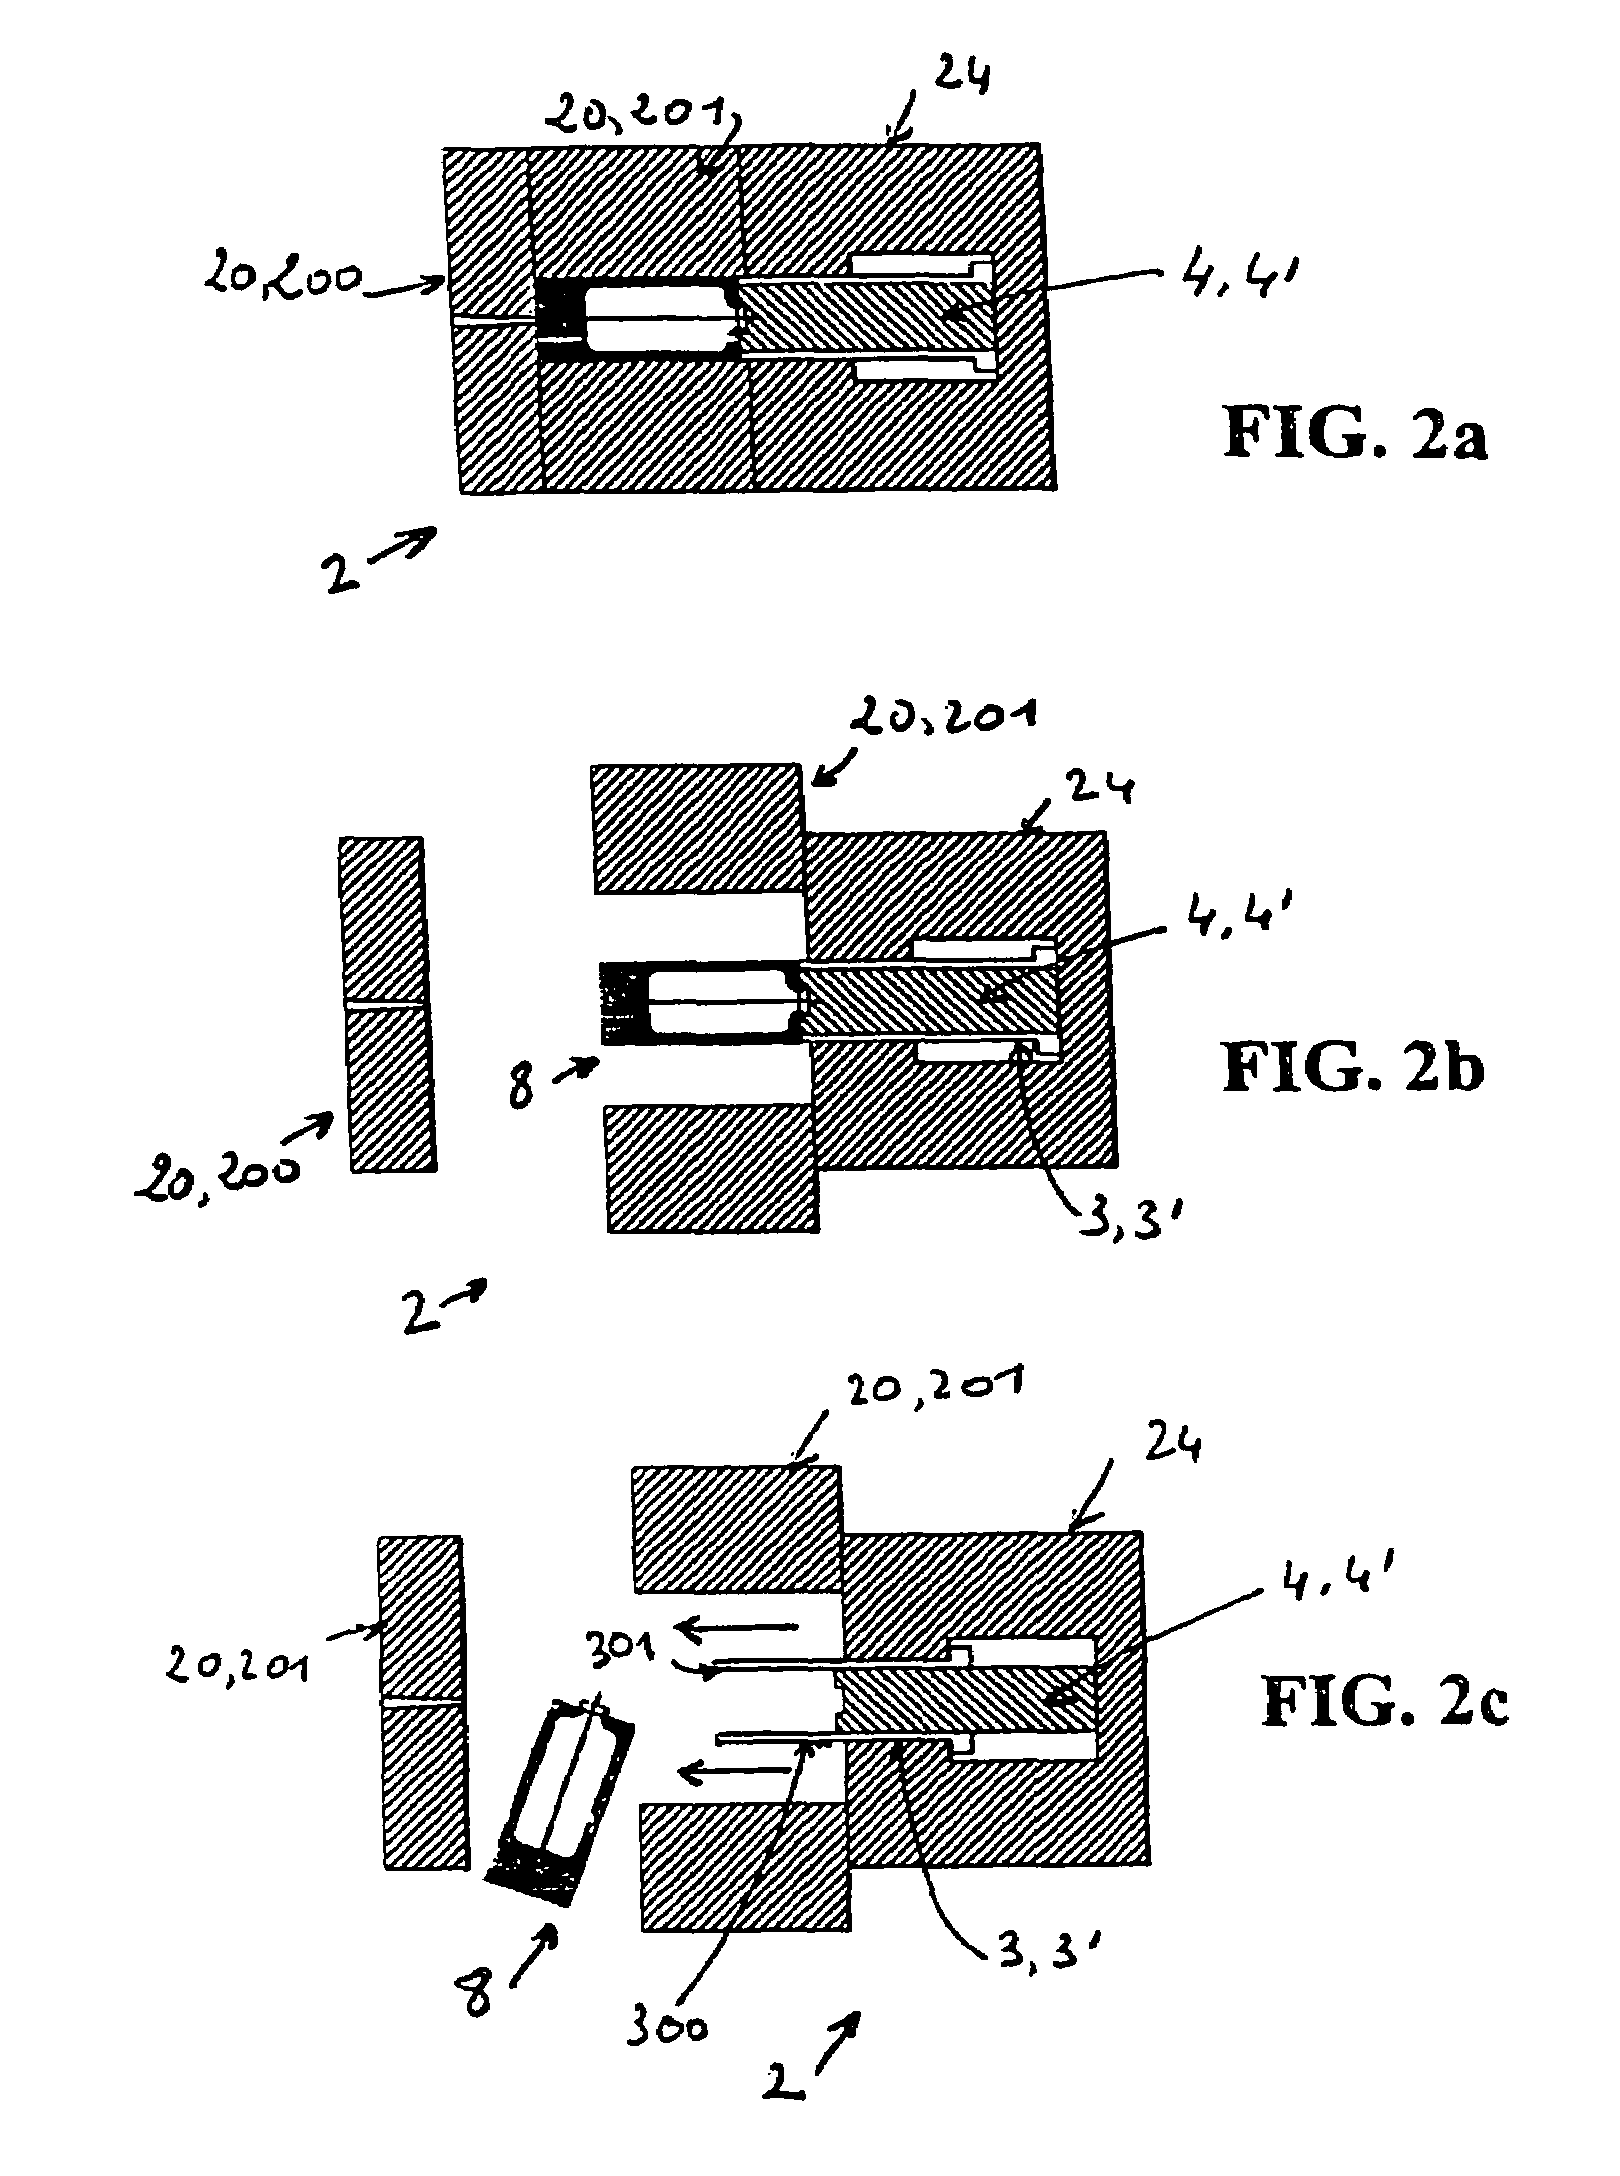 Overmoulding of receptacles with a thermoplastic material at a high rate of production